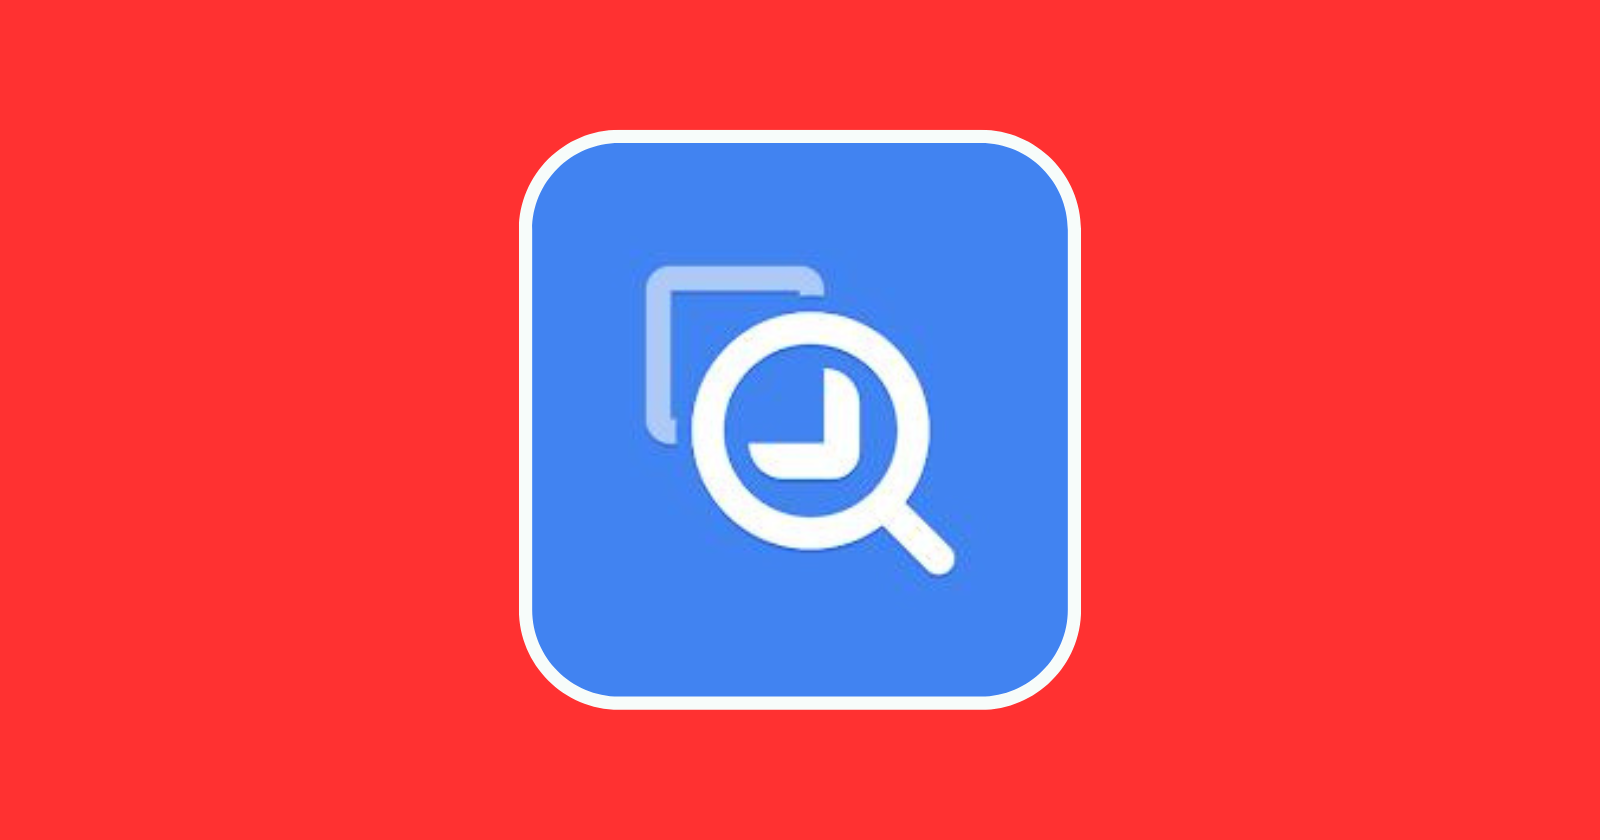 How to use the Magnifier app on your Google Pixel phone